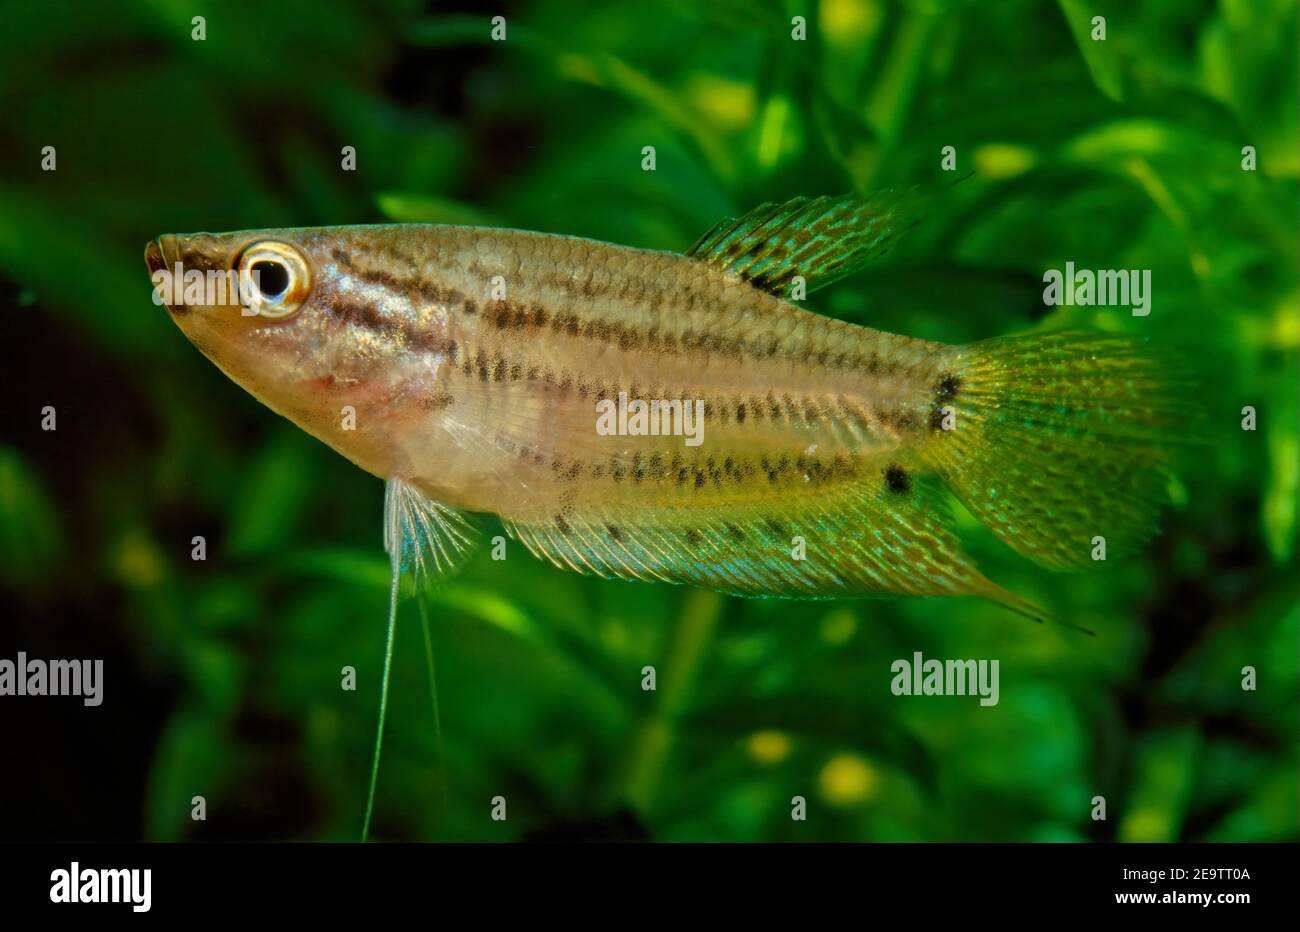 The croaking gourami (Trichopsis vittata) is a species of small freshwater labyrinth fish of the gourami family. Stock Photo